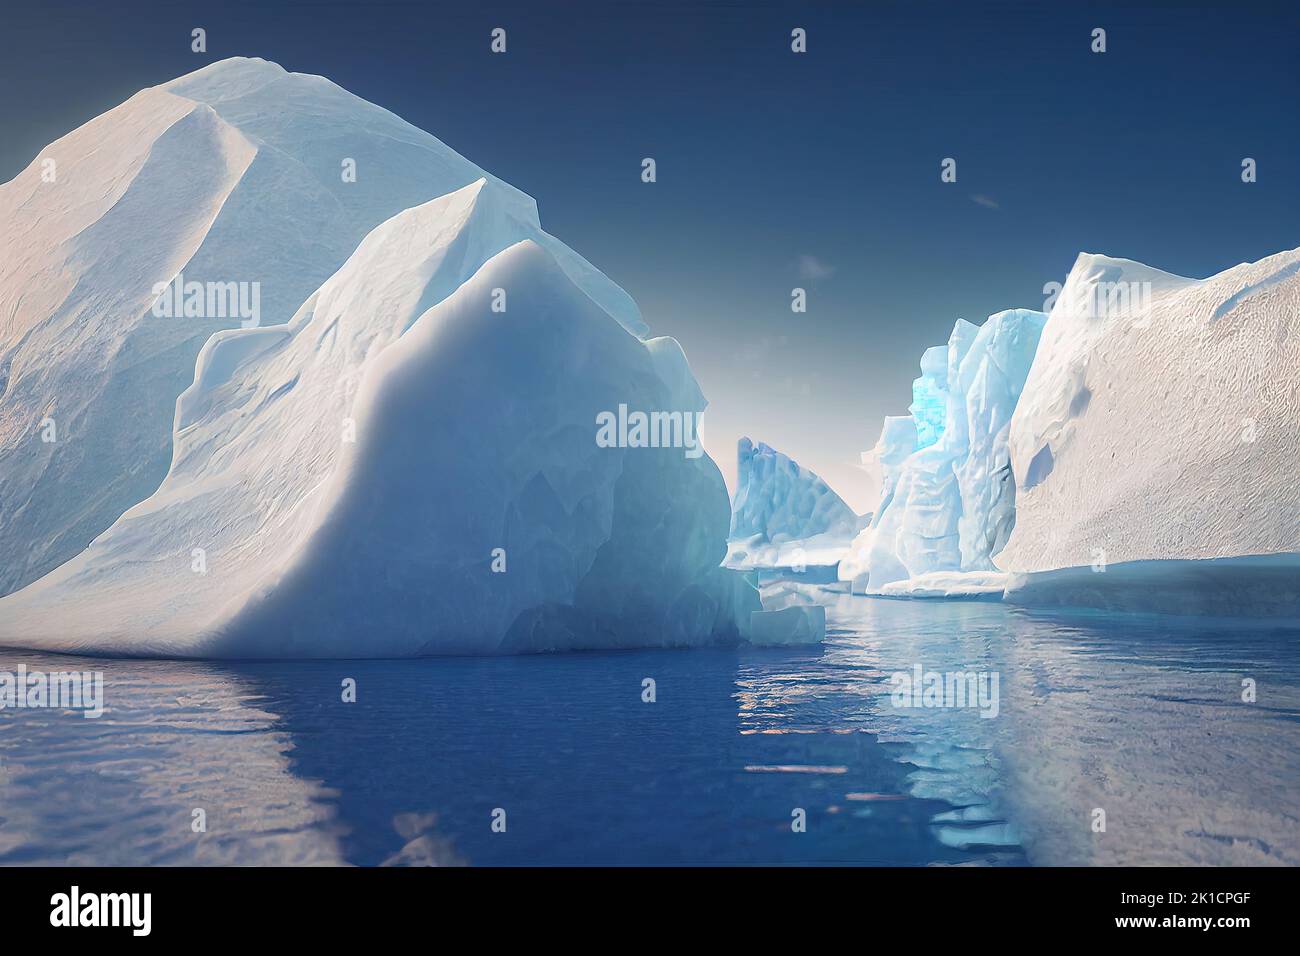 The early morning melting of an iceberg in the Arctic Ocean is concept of global warming and climate change. 3D illustration and digital painting. Stock Photo